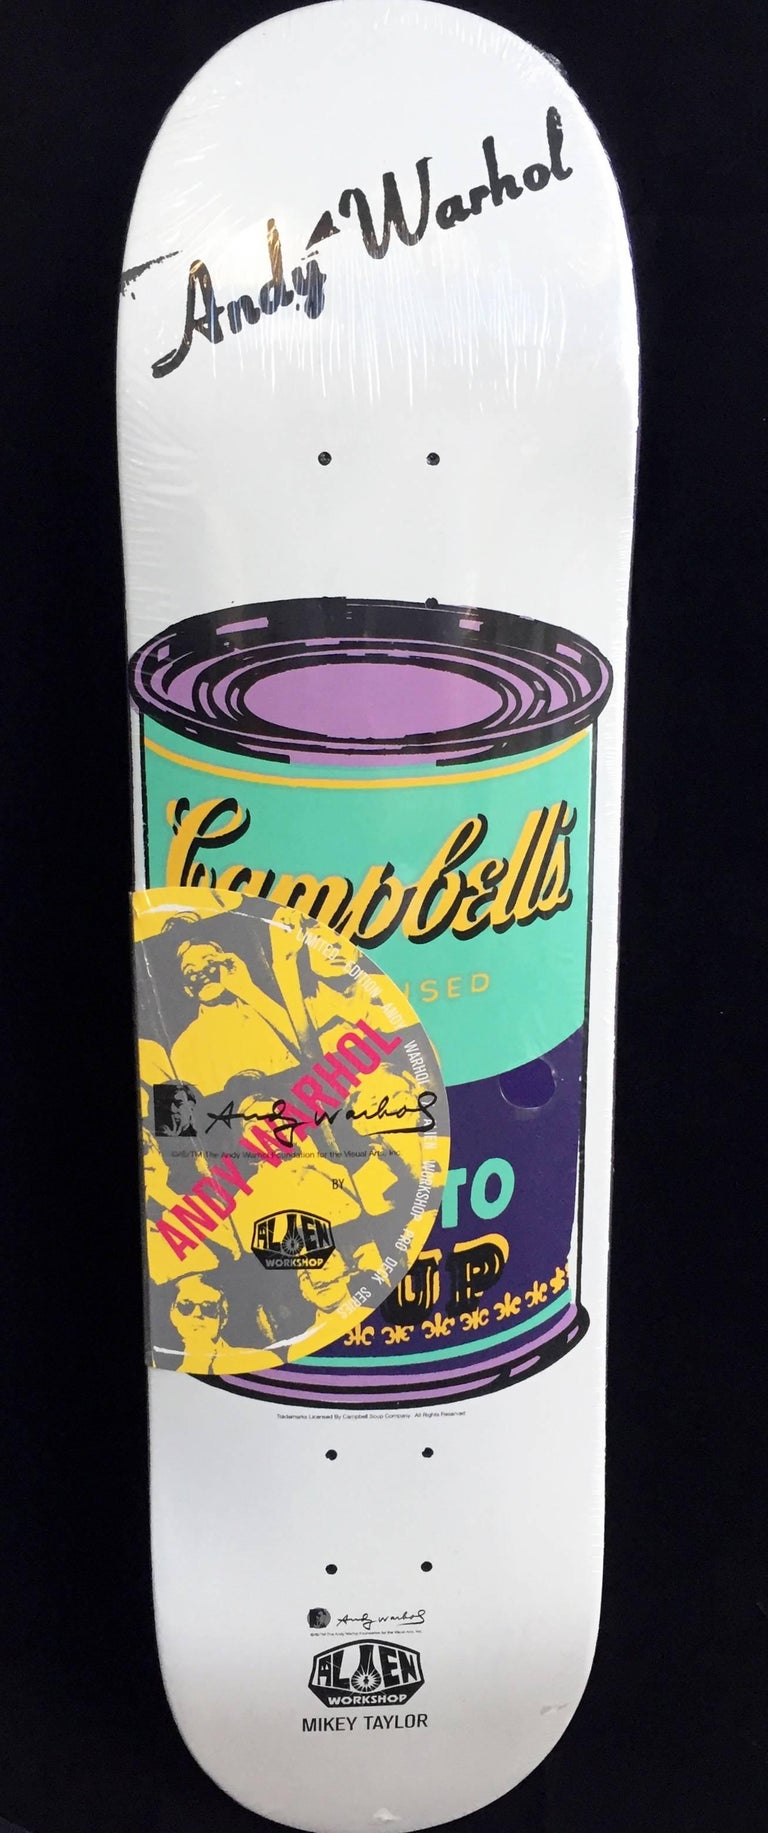 Andy Warhol Skateboard Deck (Warhol Campbell's Soup)  - Pop Art Print by (after) Andy Warhol